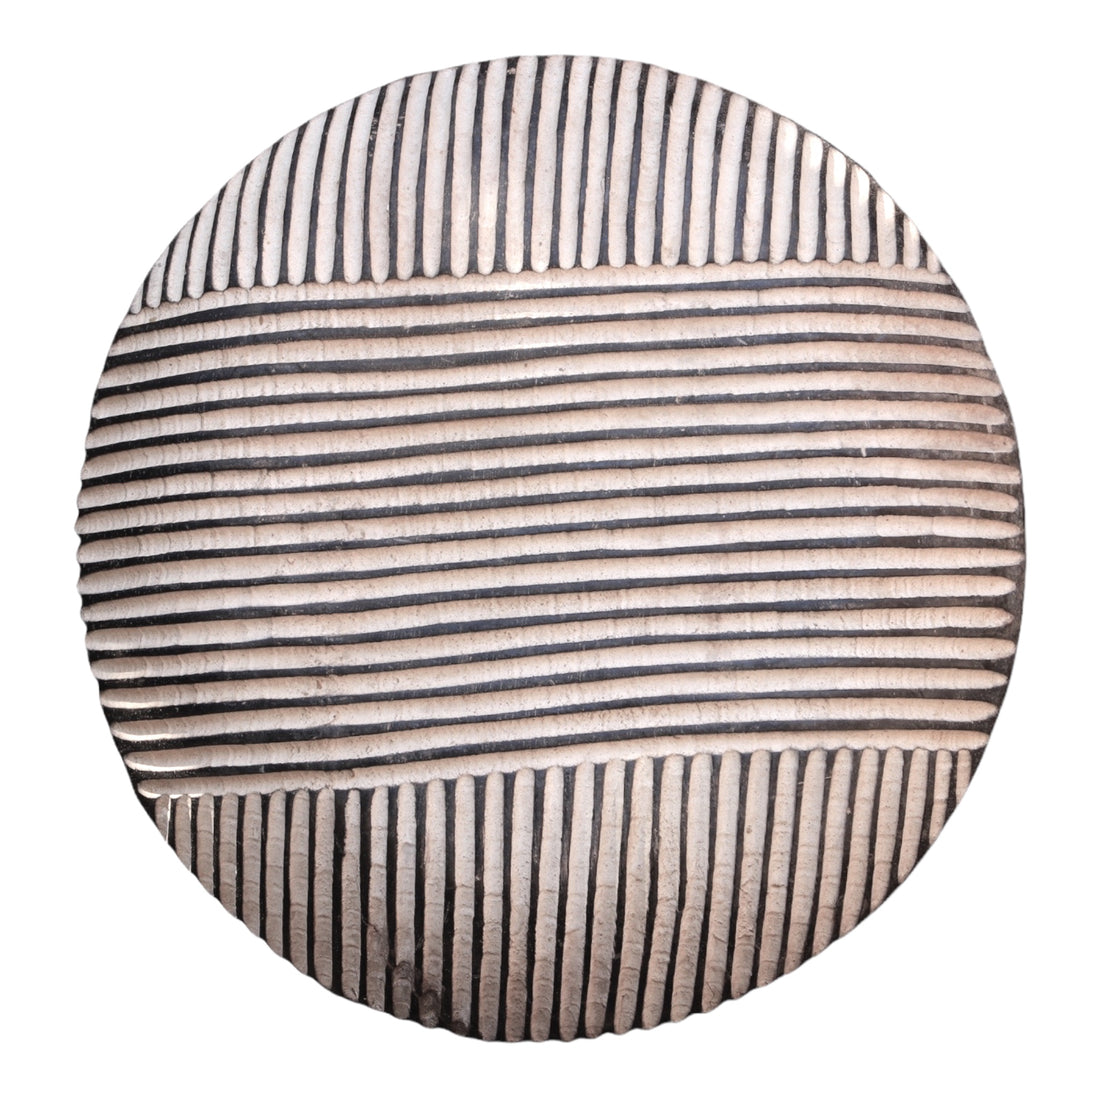 African Wooden Shield - White Wash Various Patterns - eyahomeliving